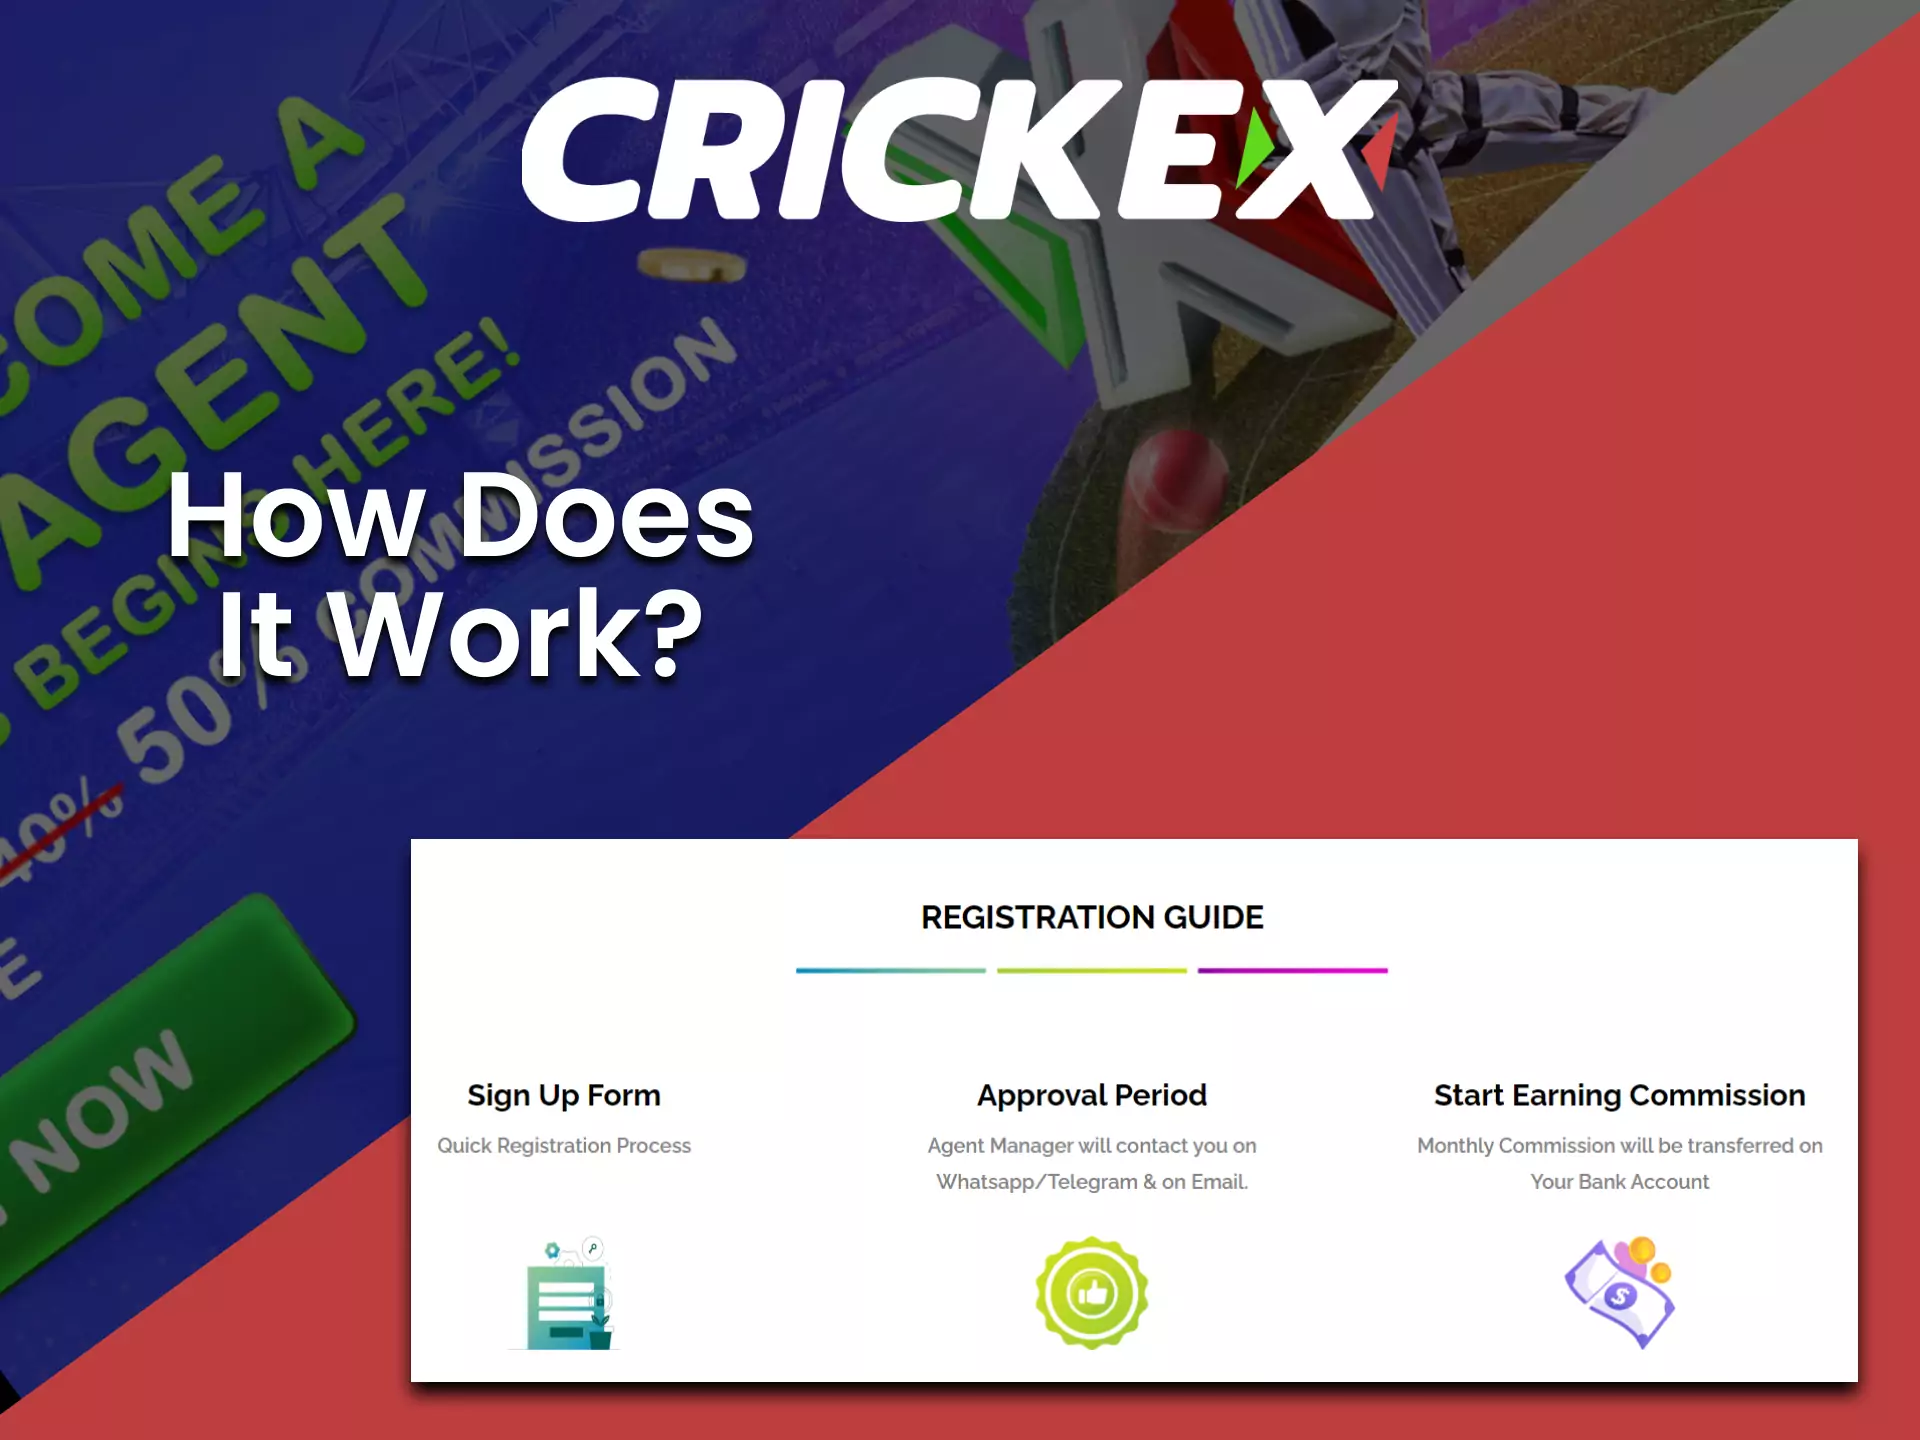 The affiliate program by Crickex allows members to get additional money for ads.